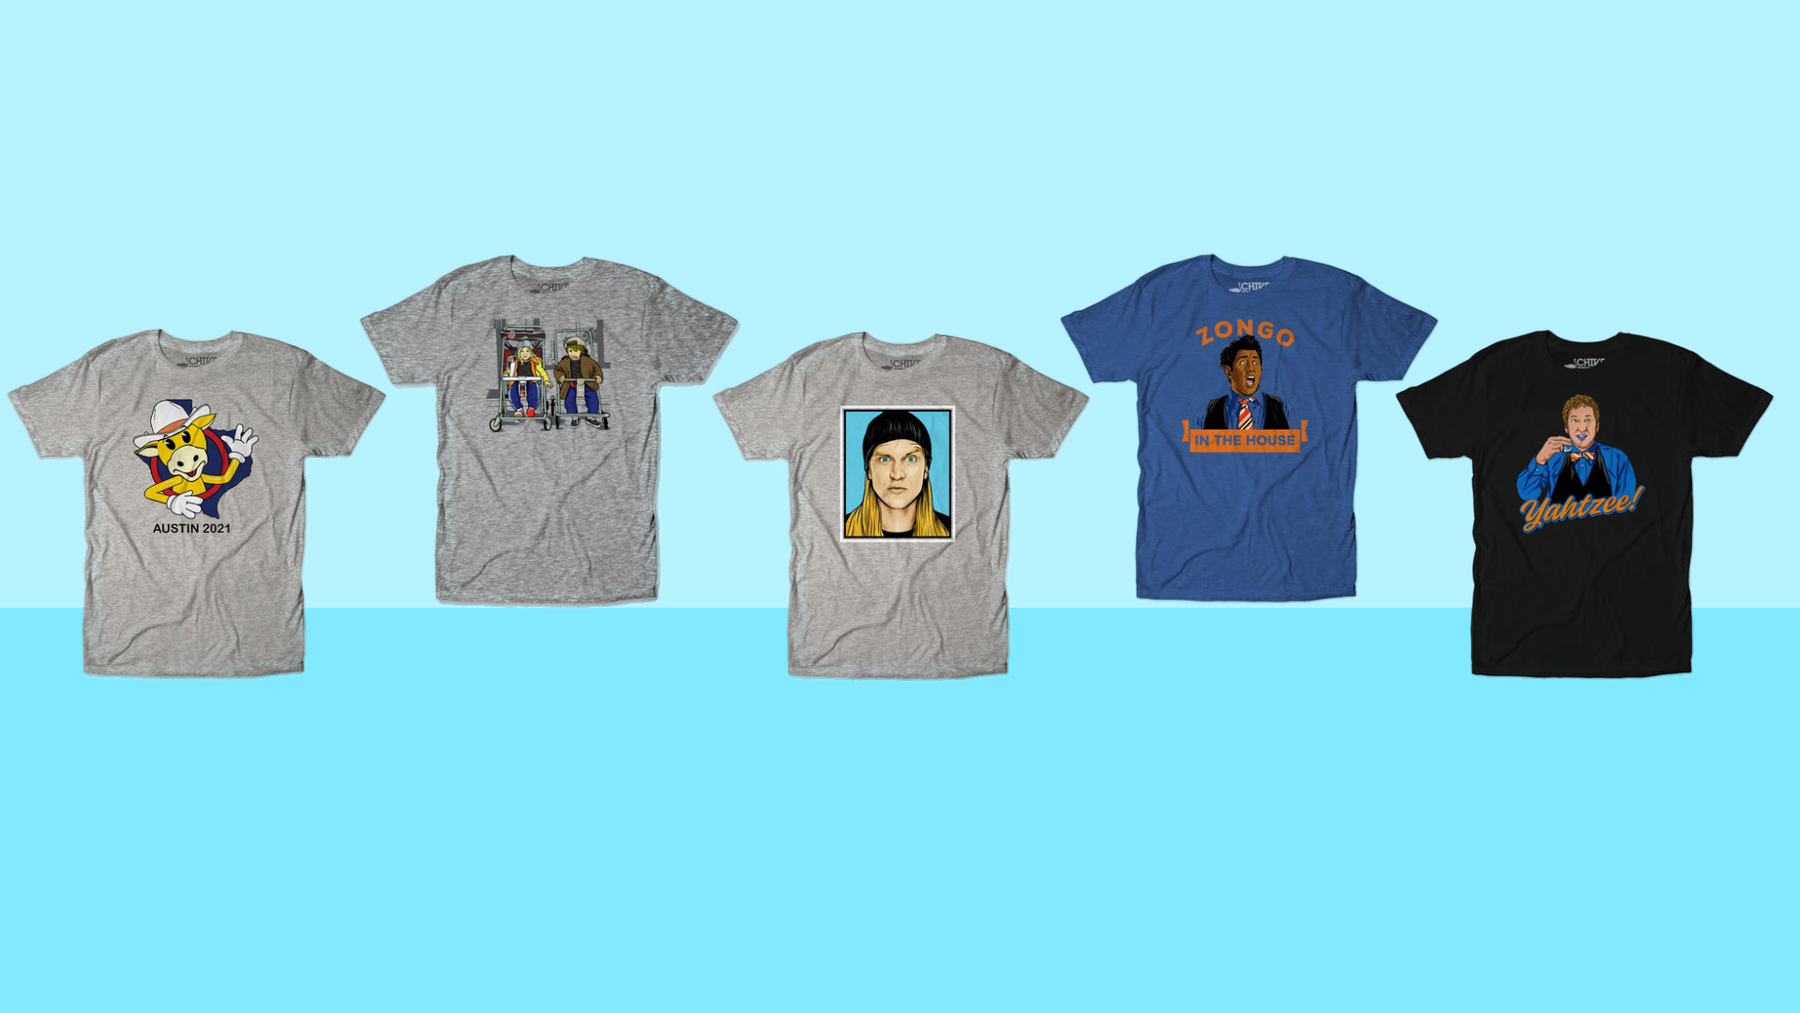 Get Your Laugh On with These Top 5 Hilarious Comedy Tee-Shirts